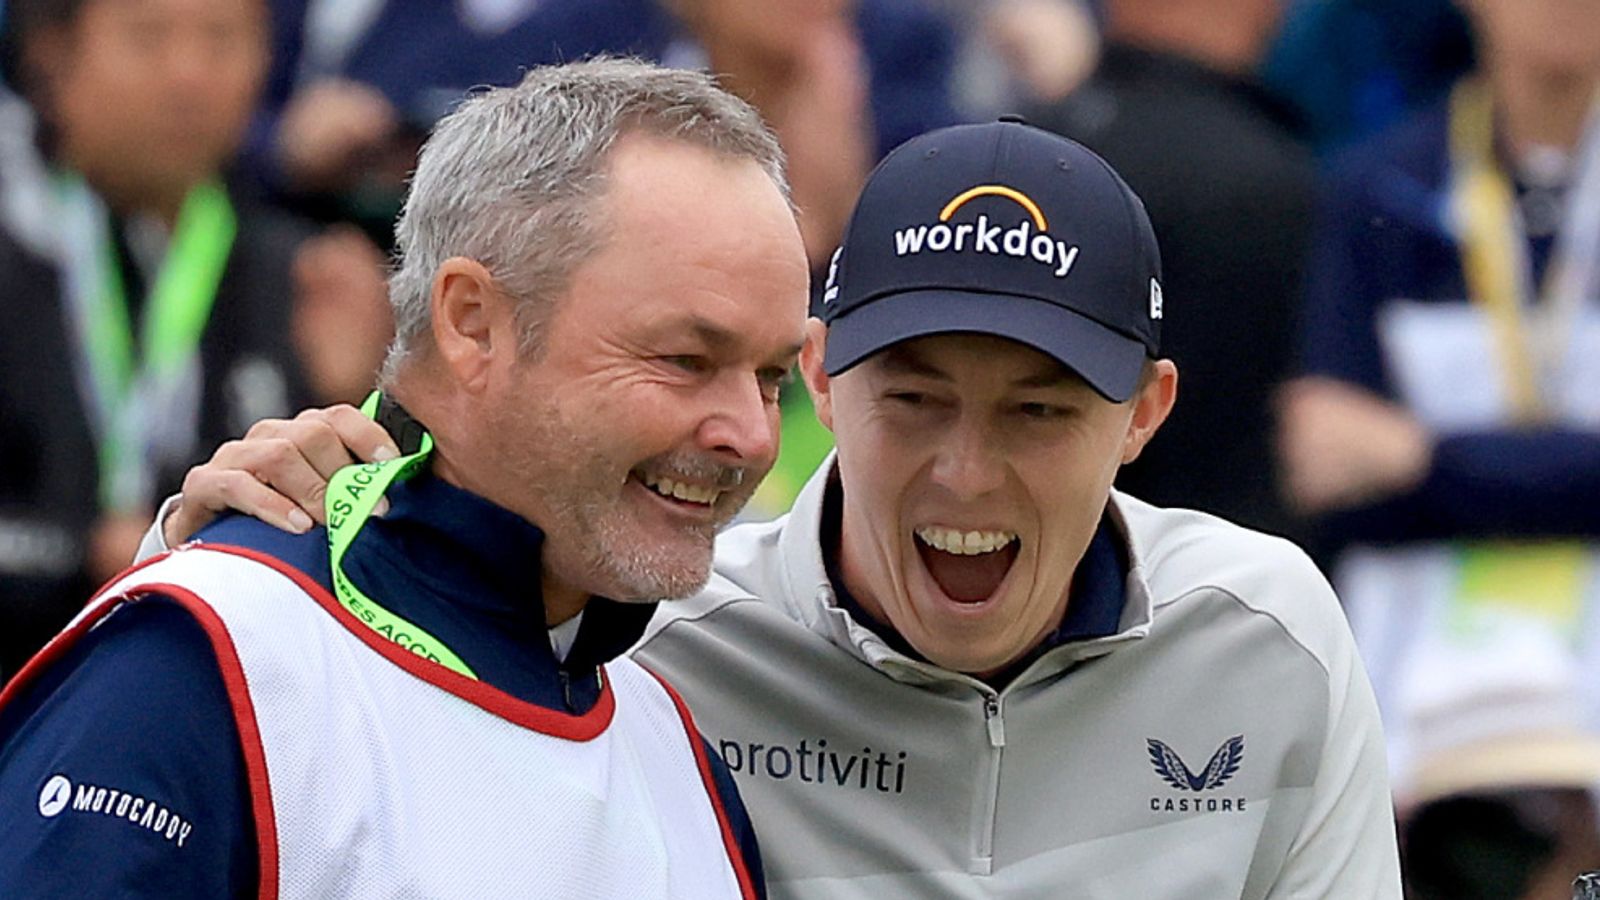 US Open: Matthew Fitzpatrick hails maiden major win as ‘out of this world’ and has a taste for more